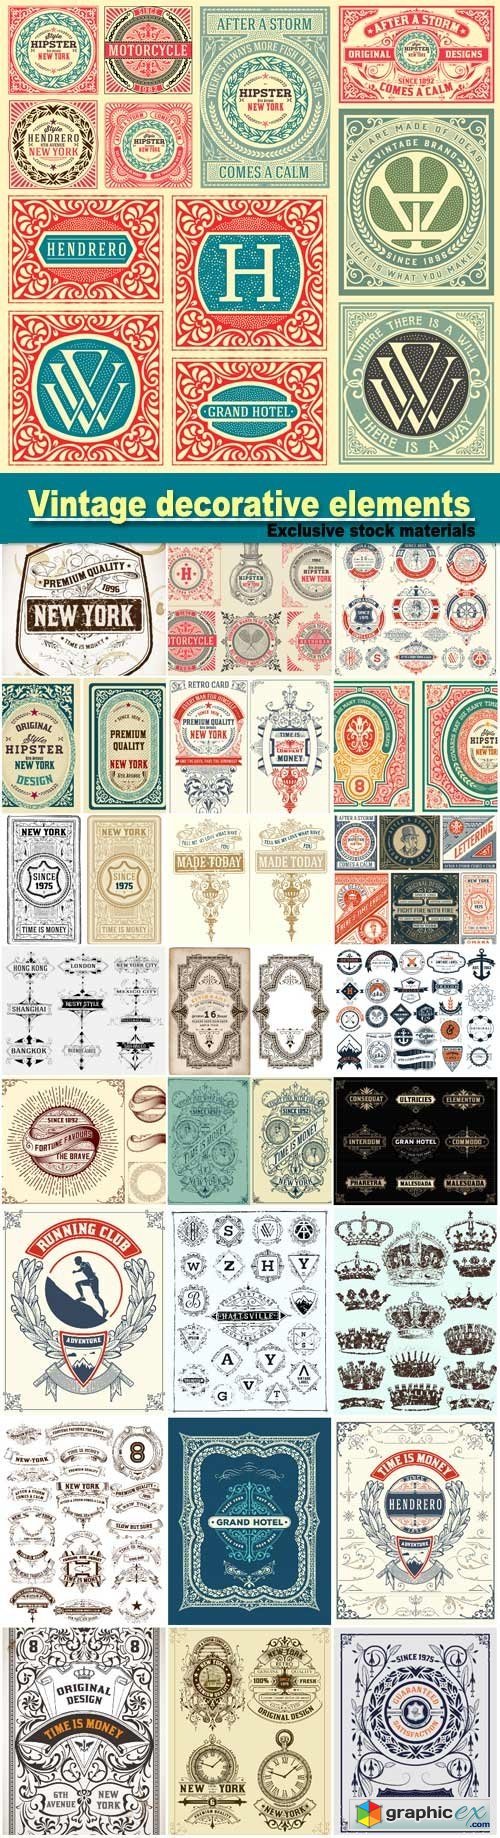 Vintage decorative elements in the vector, frame, labels, ornaments